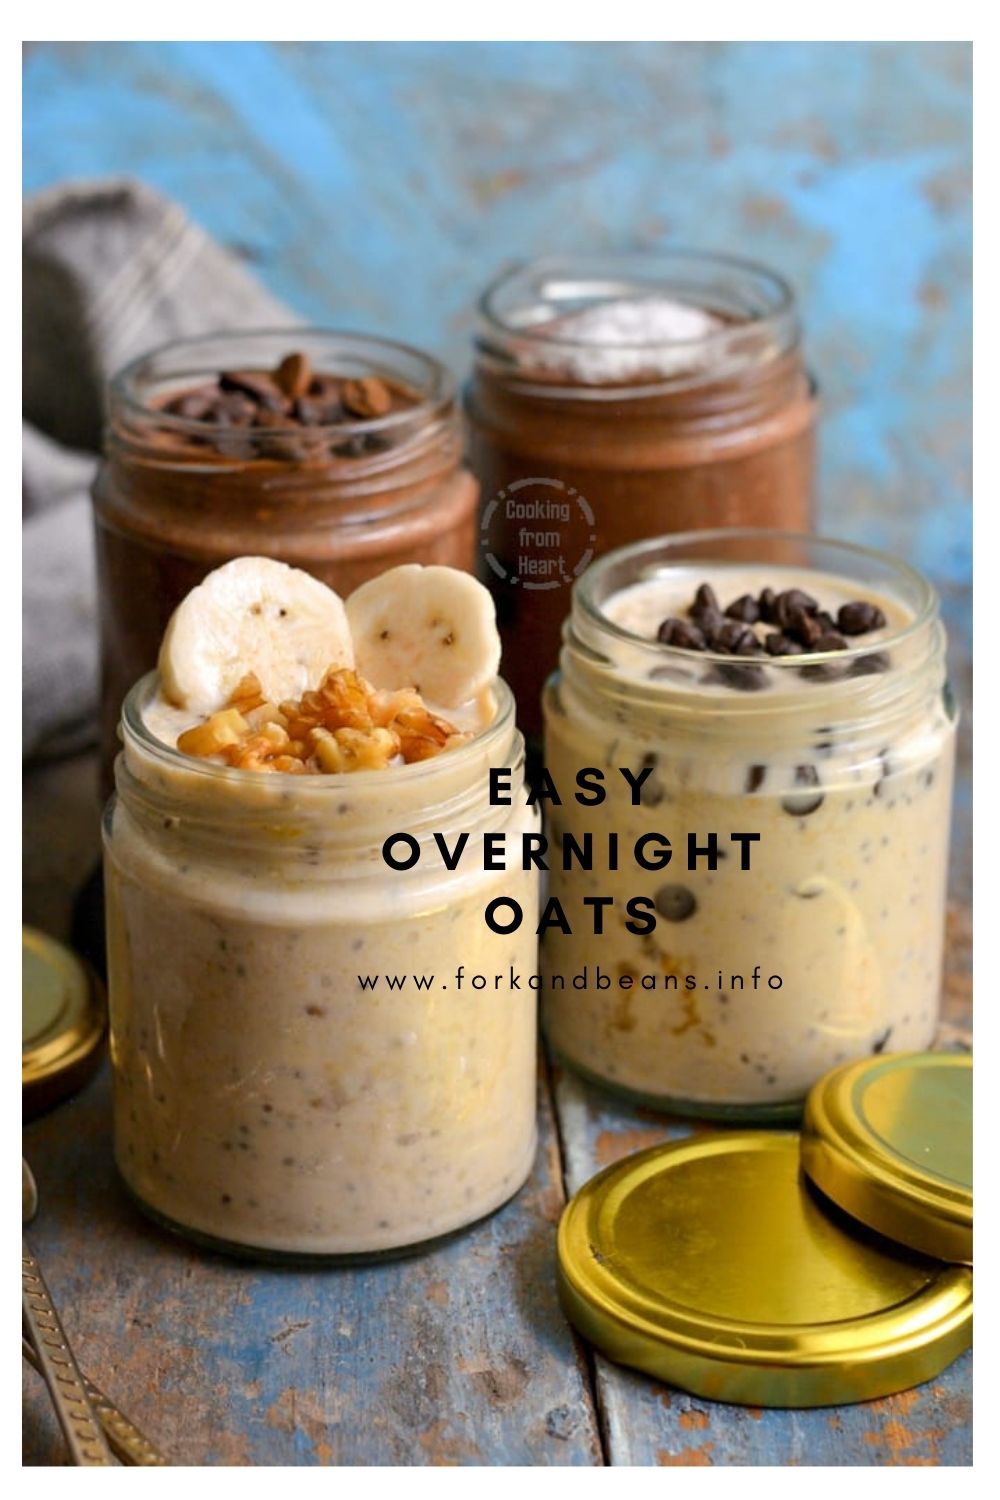 Easy Overnight Oats | 4 Flavors of Overnight Oats